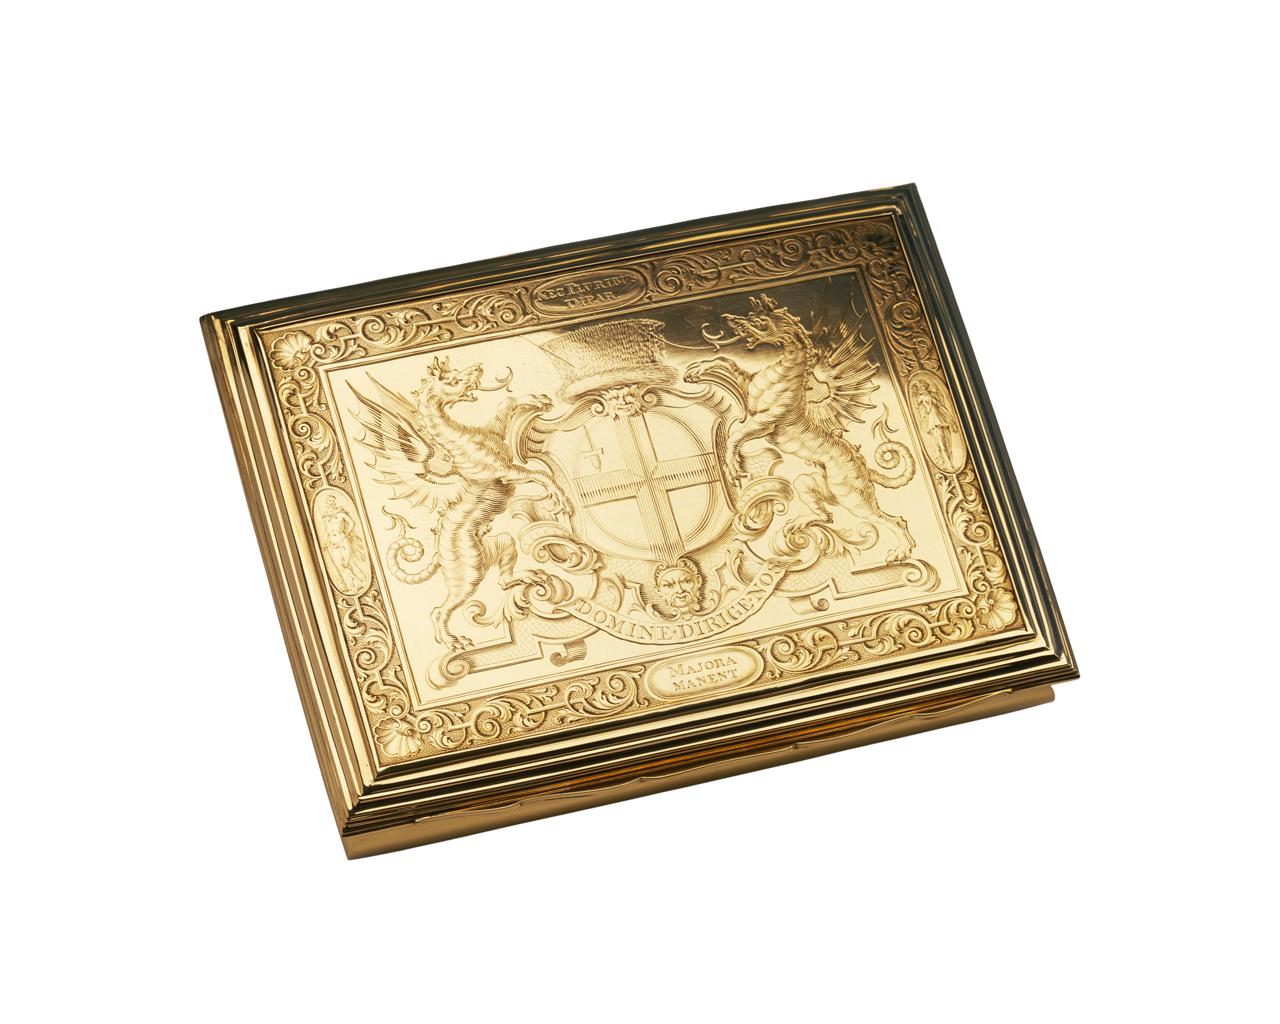 An engraving of the City of London coat of arms with the motto 'DOMINE DIRIGE NOS' covers the lid of the box, within a scrolled border with scallop shell design at the corners and classical figures of Hercules on the left and Victory on the right. Inscribed above the arms is: 'NEC PLURIBUS IMPAR.', and below: 'MAJORA MANENT'. The front of the box is inscribed 'IASPER CUNST LONDON'.